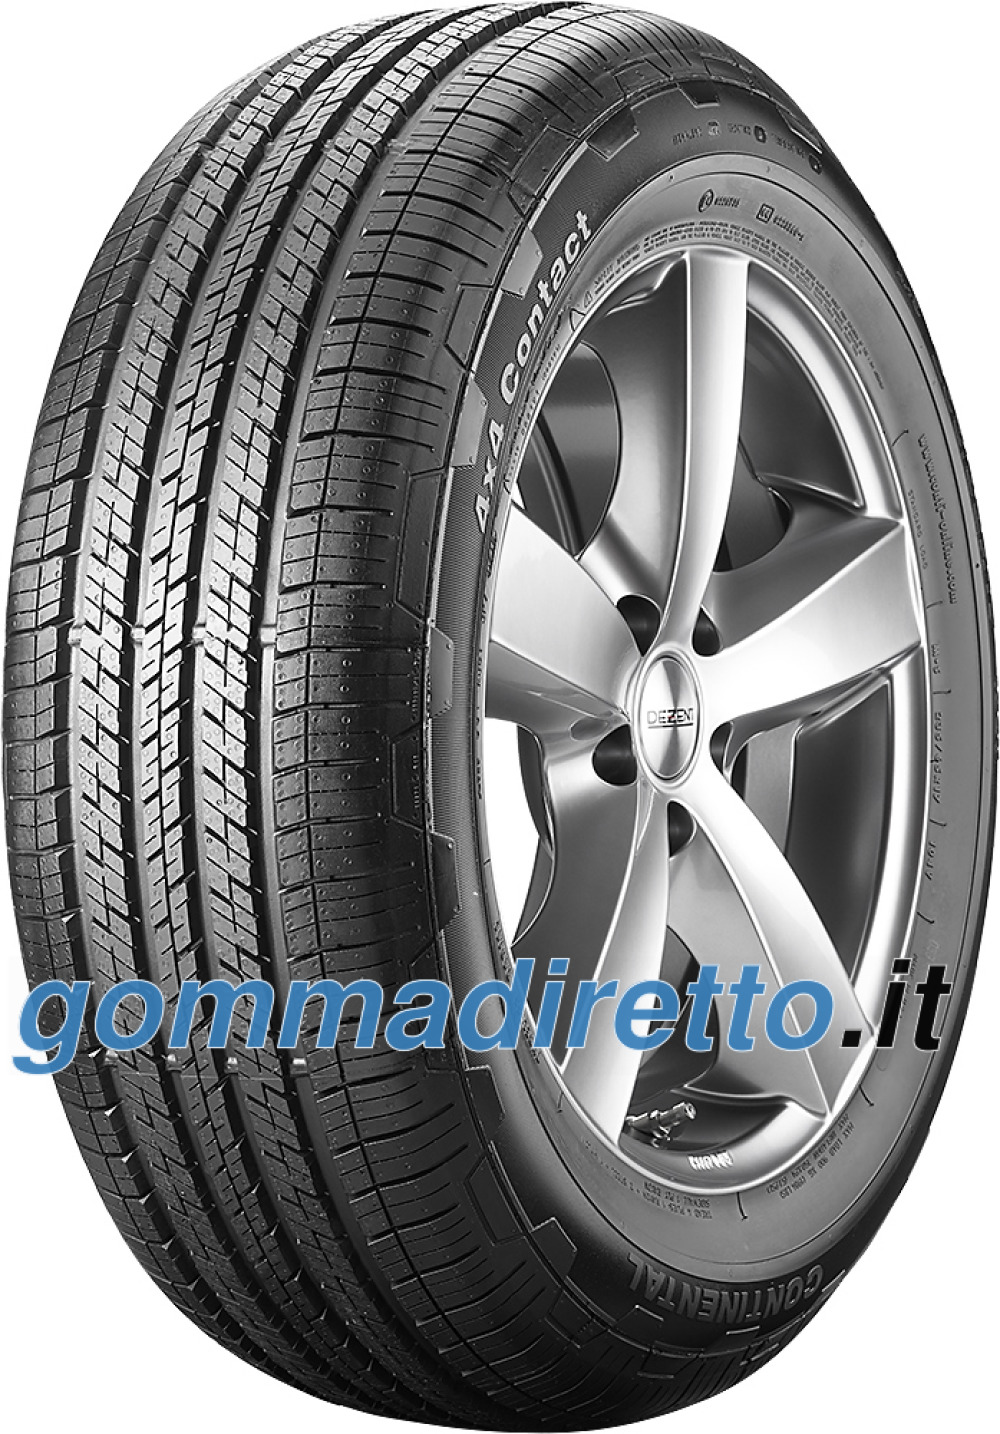 Image of Continental 4X4 Contact ( 215/65 R16 102V XL )